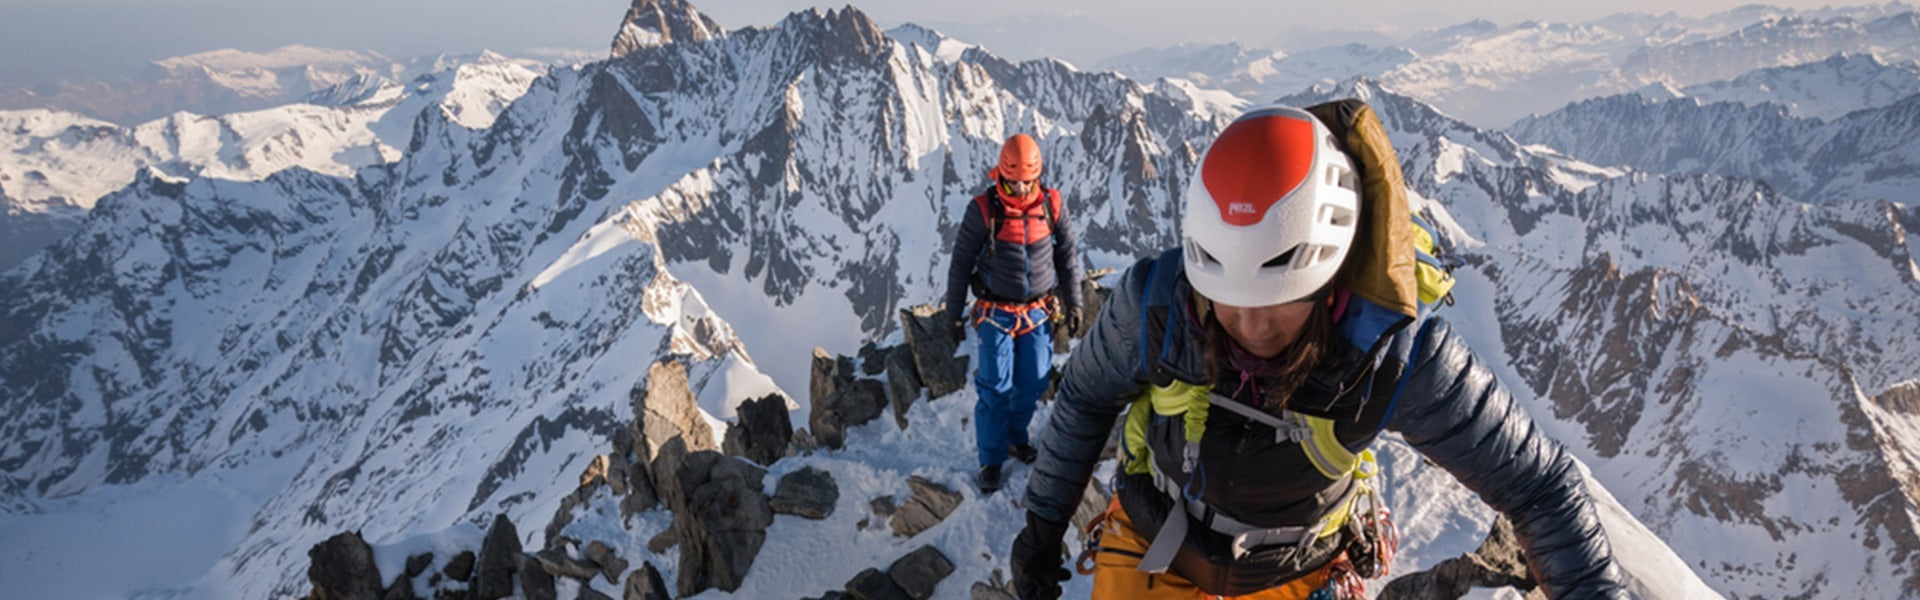 CLIMBING THE 4,000-METER PEAKS OF THE ALPS